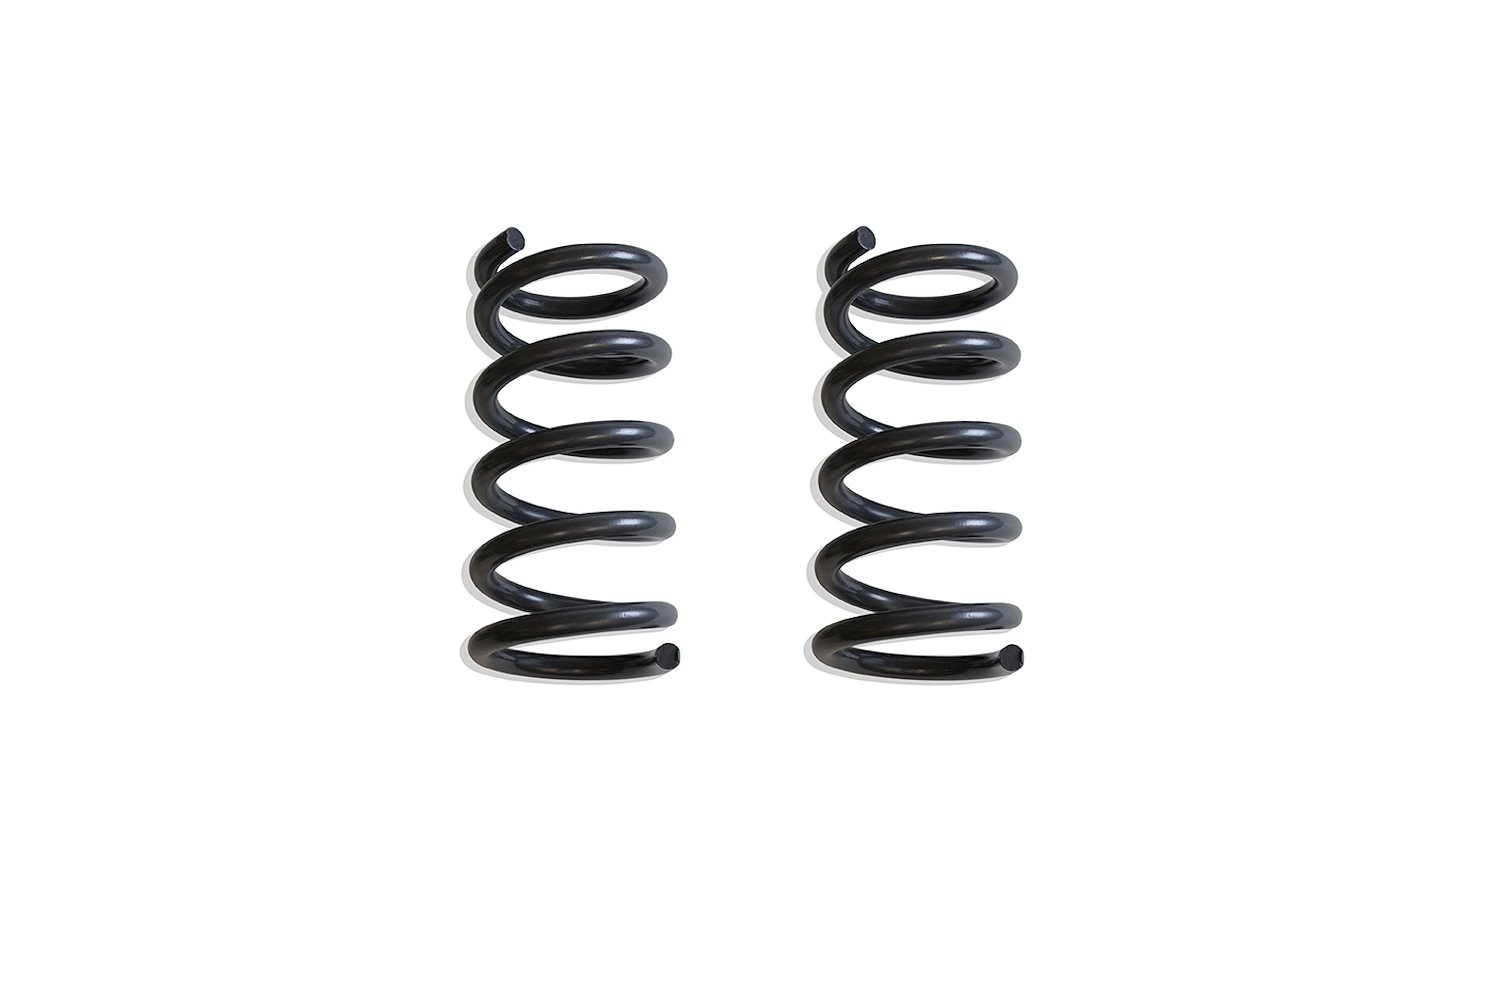 252120-6 2" Front Lowering Coils Fits 2002-2008 Dodge Ram 1500